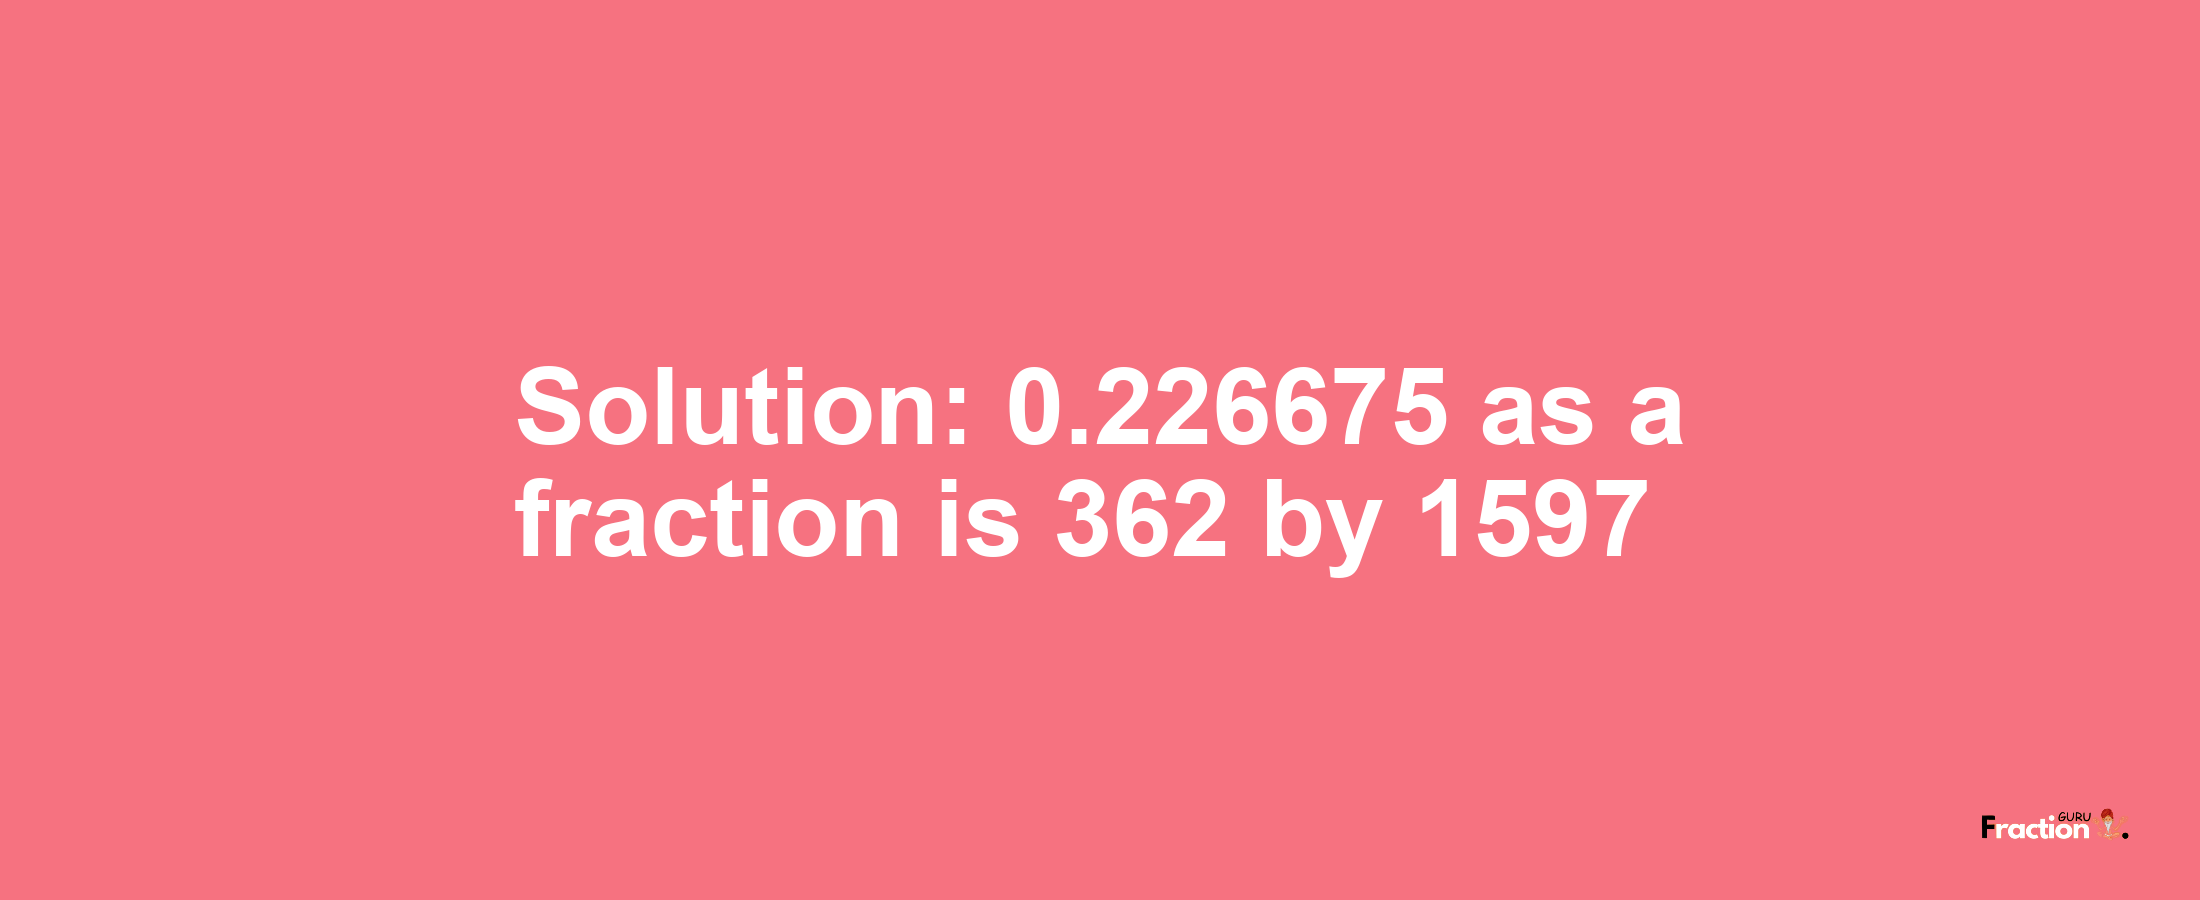 Solution:0.226675 as a fraction is 362/1597